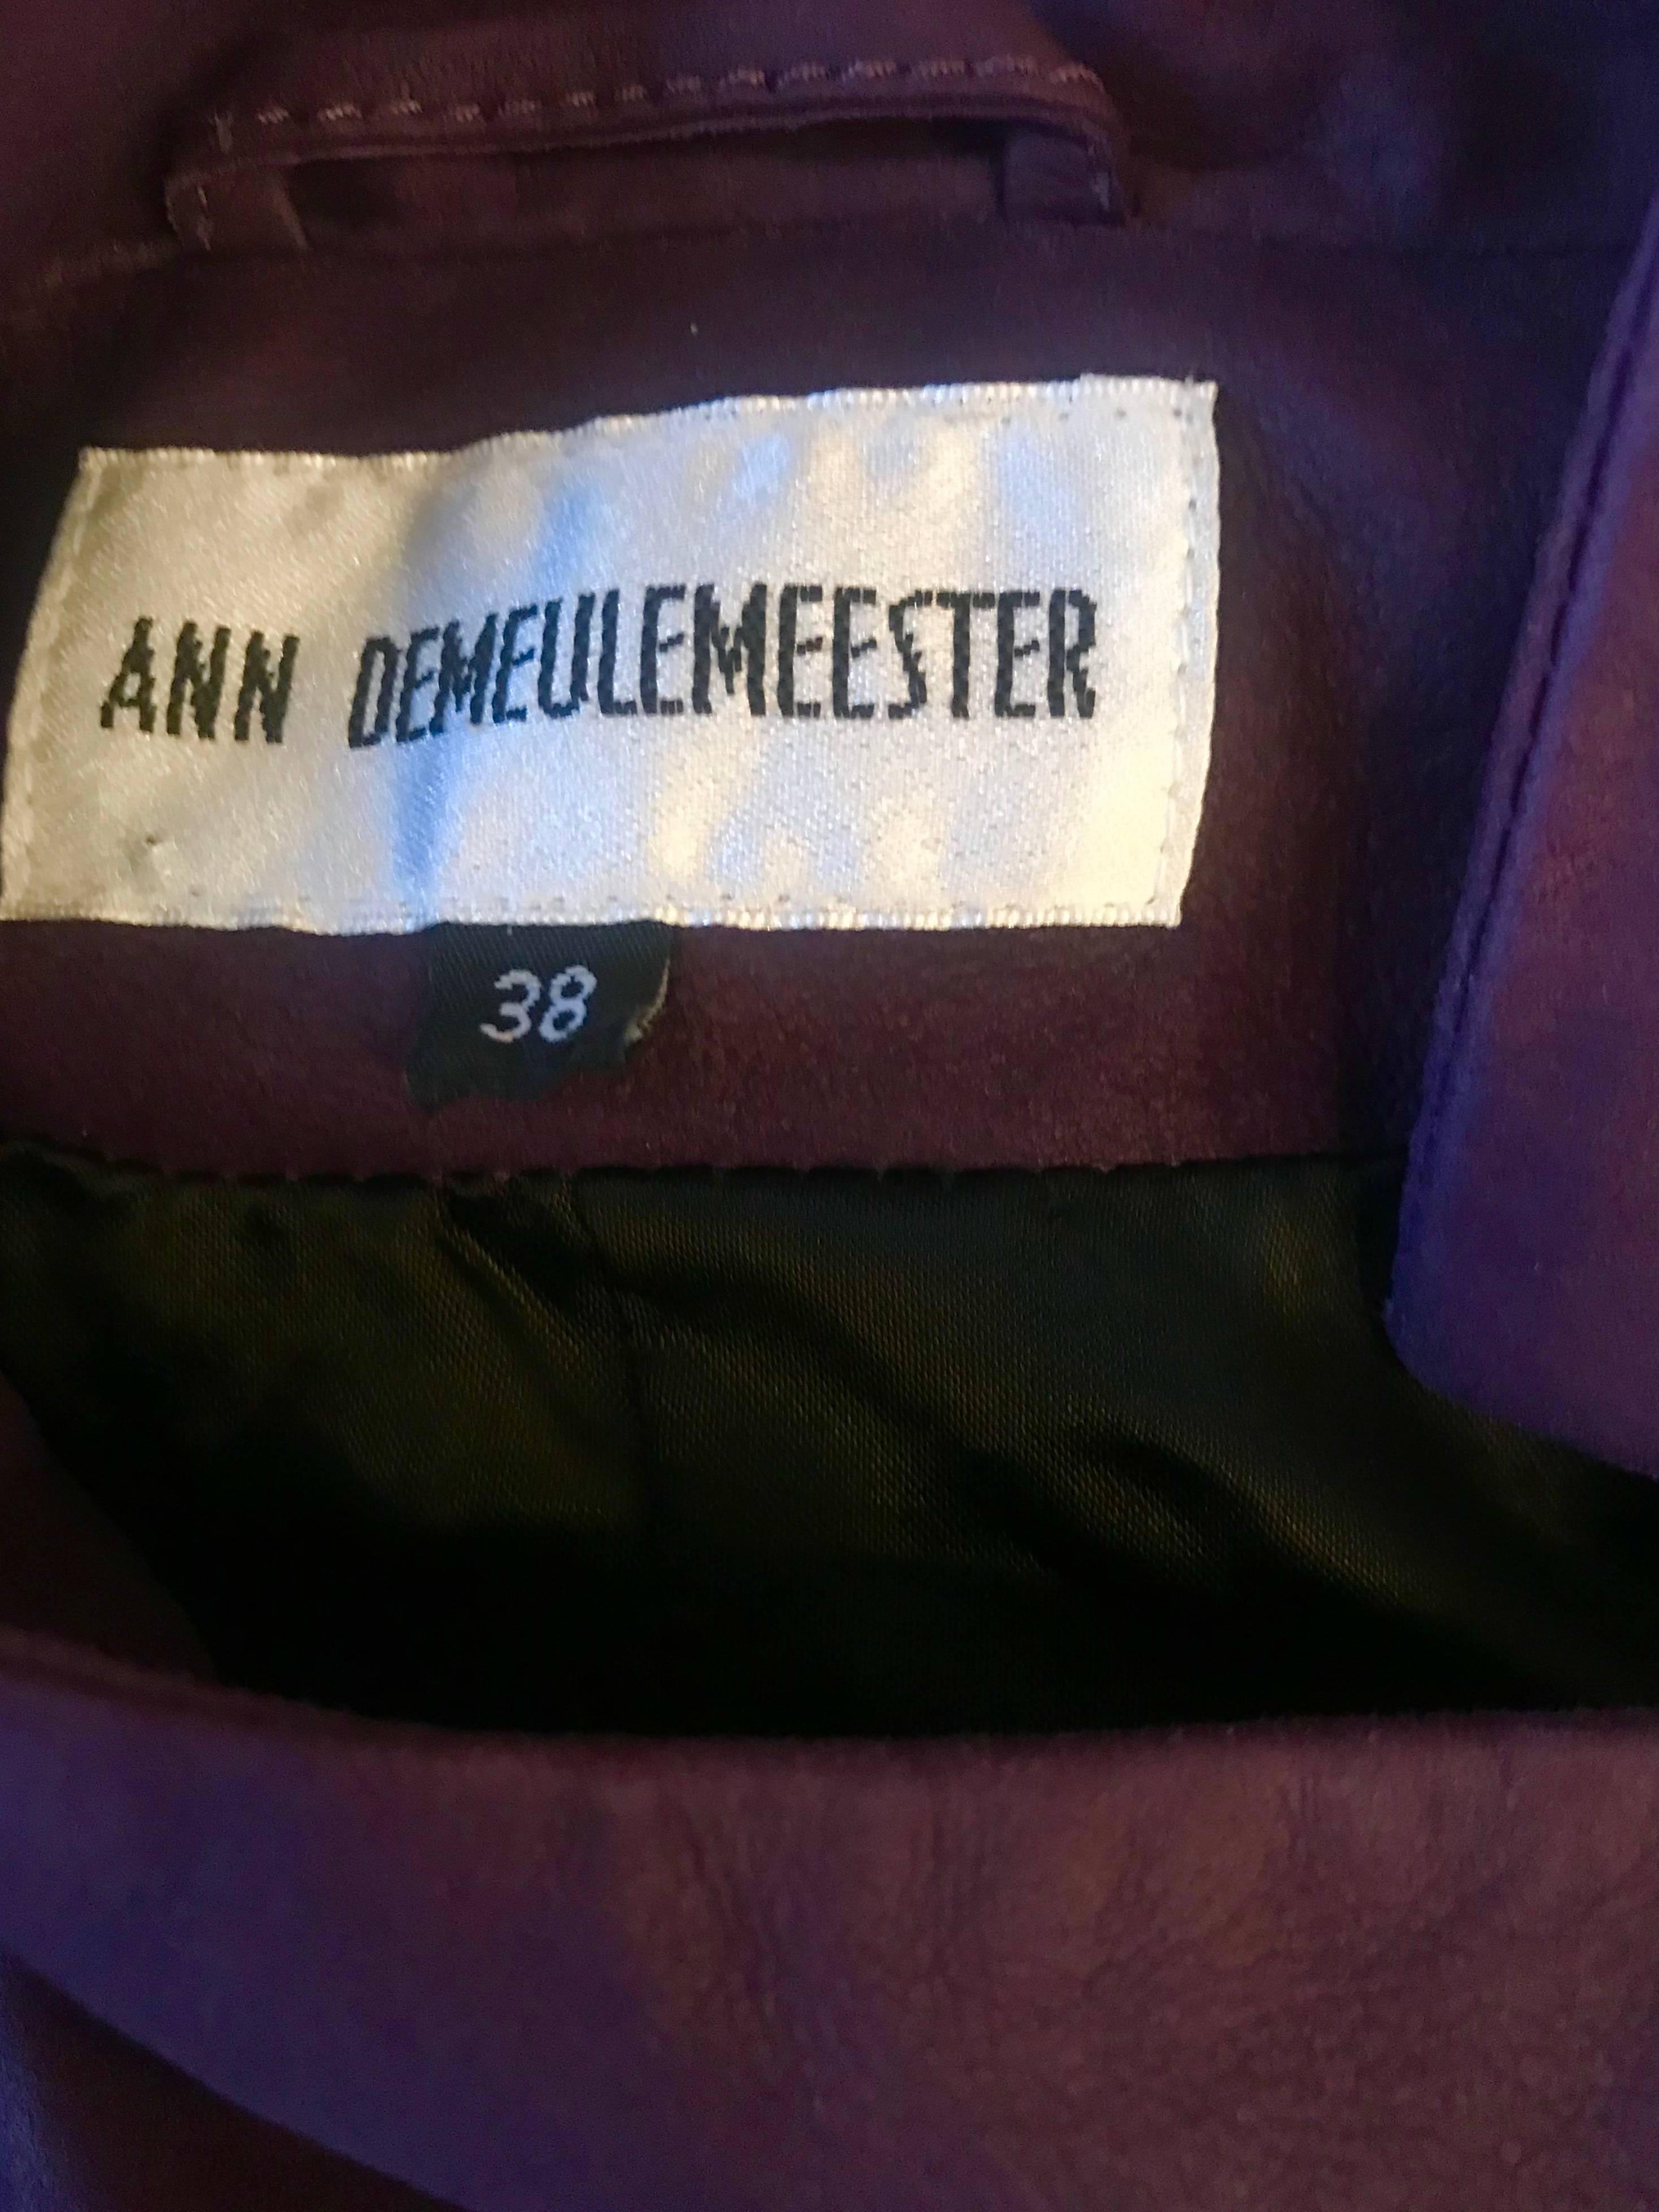 Stylish 1990s ANN DEMEULEMEESTER purple/eggplant leather motorcycle jacket! Features a luxurious soft leather. Full black metal double zippers down the front. Zippered pocket a right waist. Fantastic tailored fit looks amazing on! The perfect